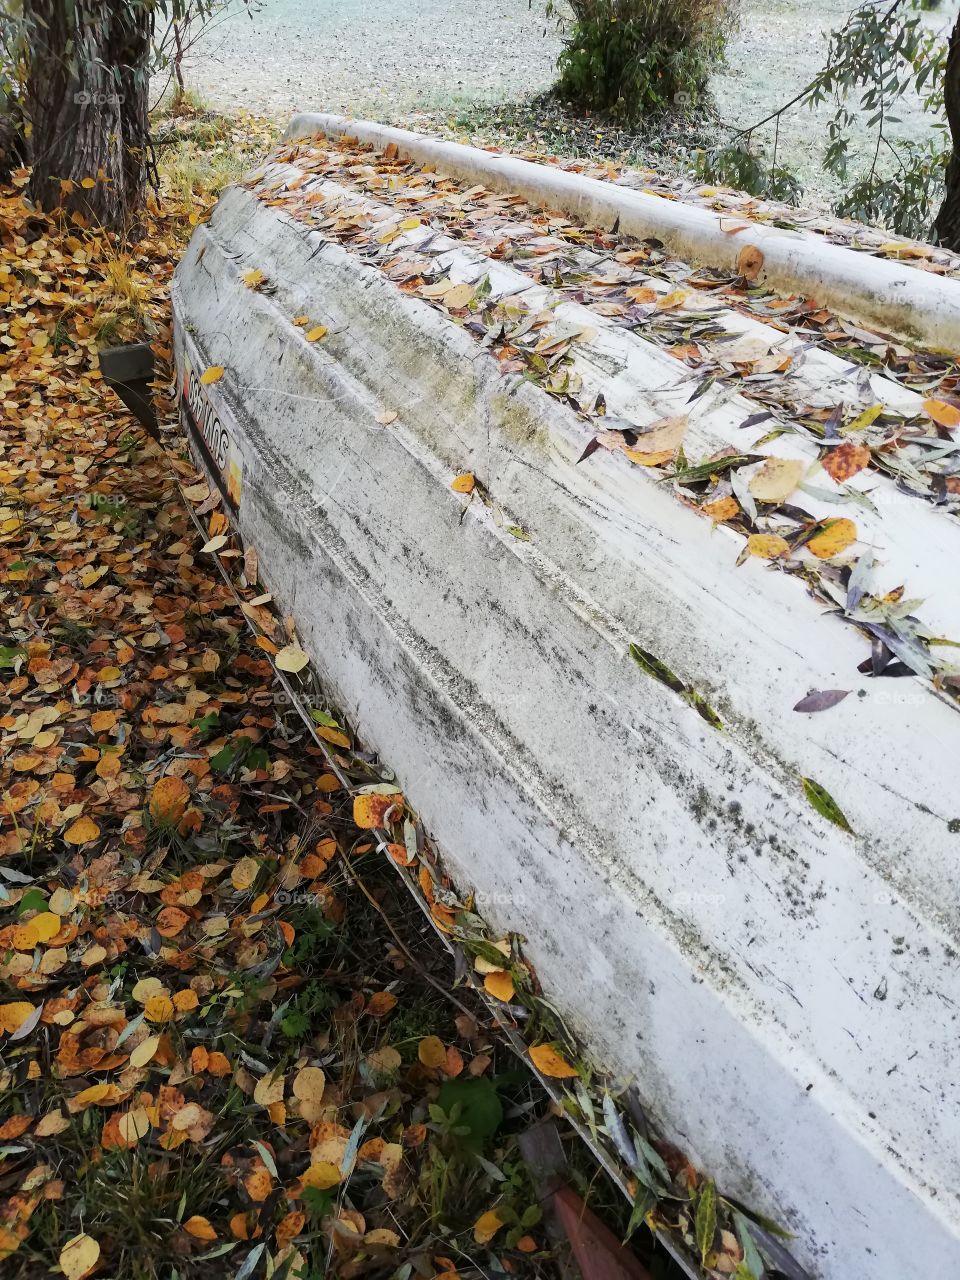 A white old boat upside down on its holder in autumn. Dry fallen leaves of the birch and the willow trees on the dirty bottom, the edge and the ground.